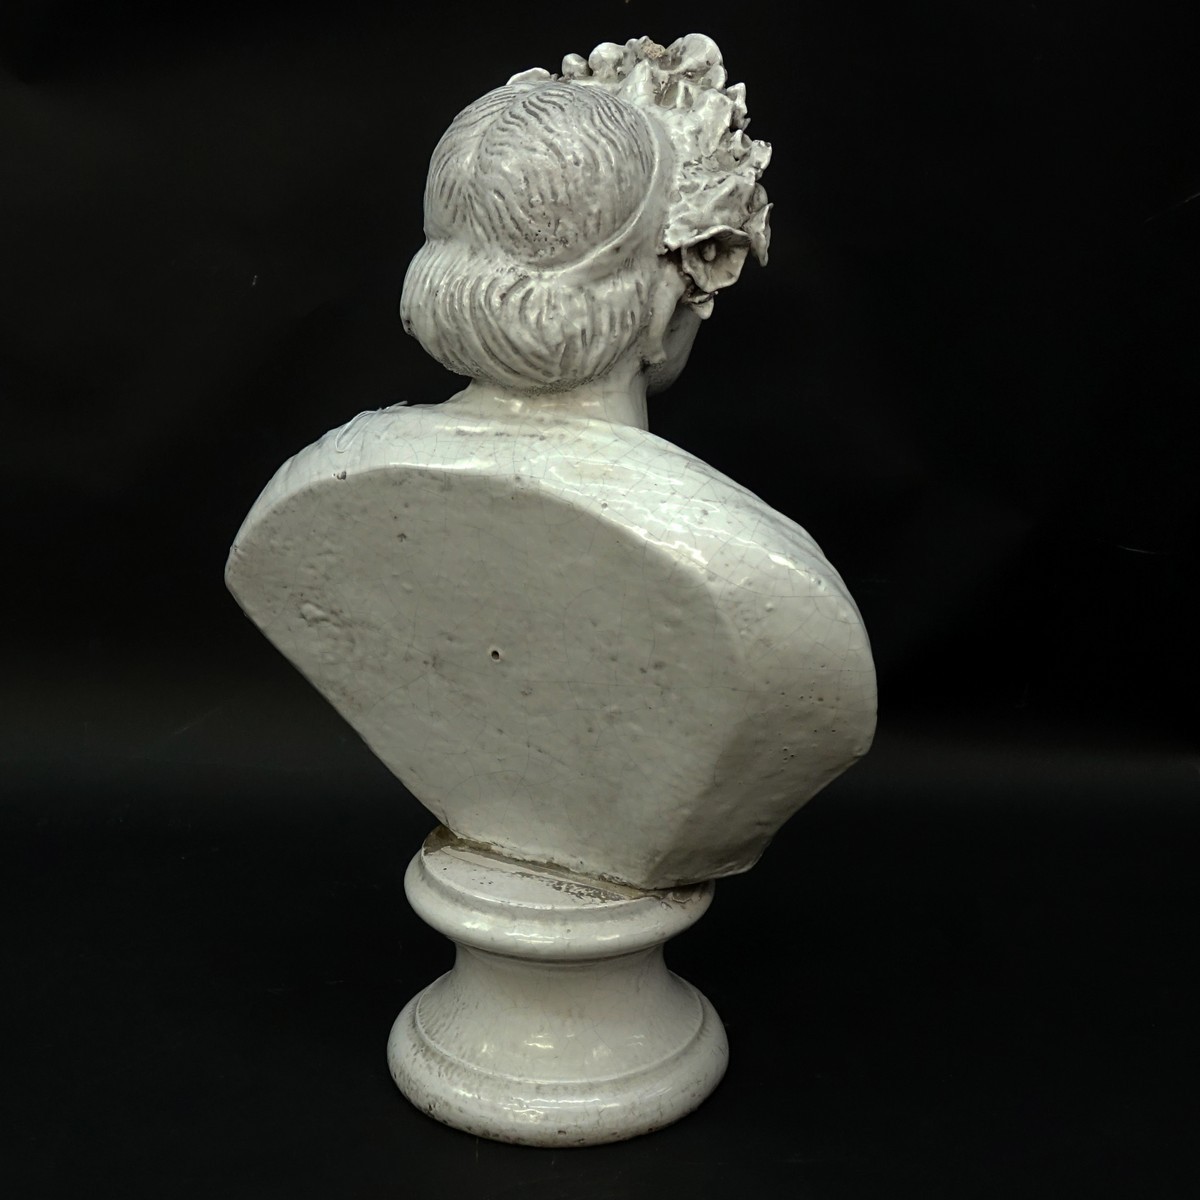 Large Faience Pottery, Neoclassical Bust of Young Woman. Unsigned.